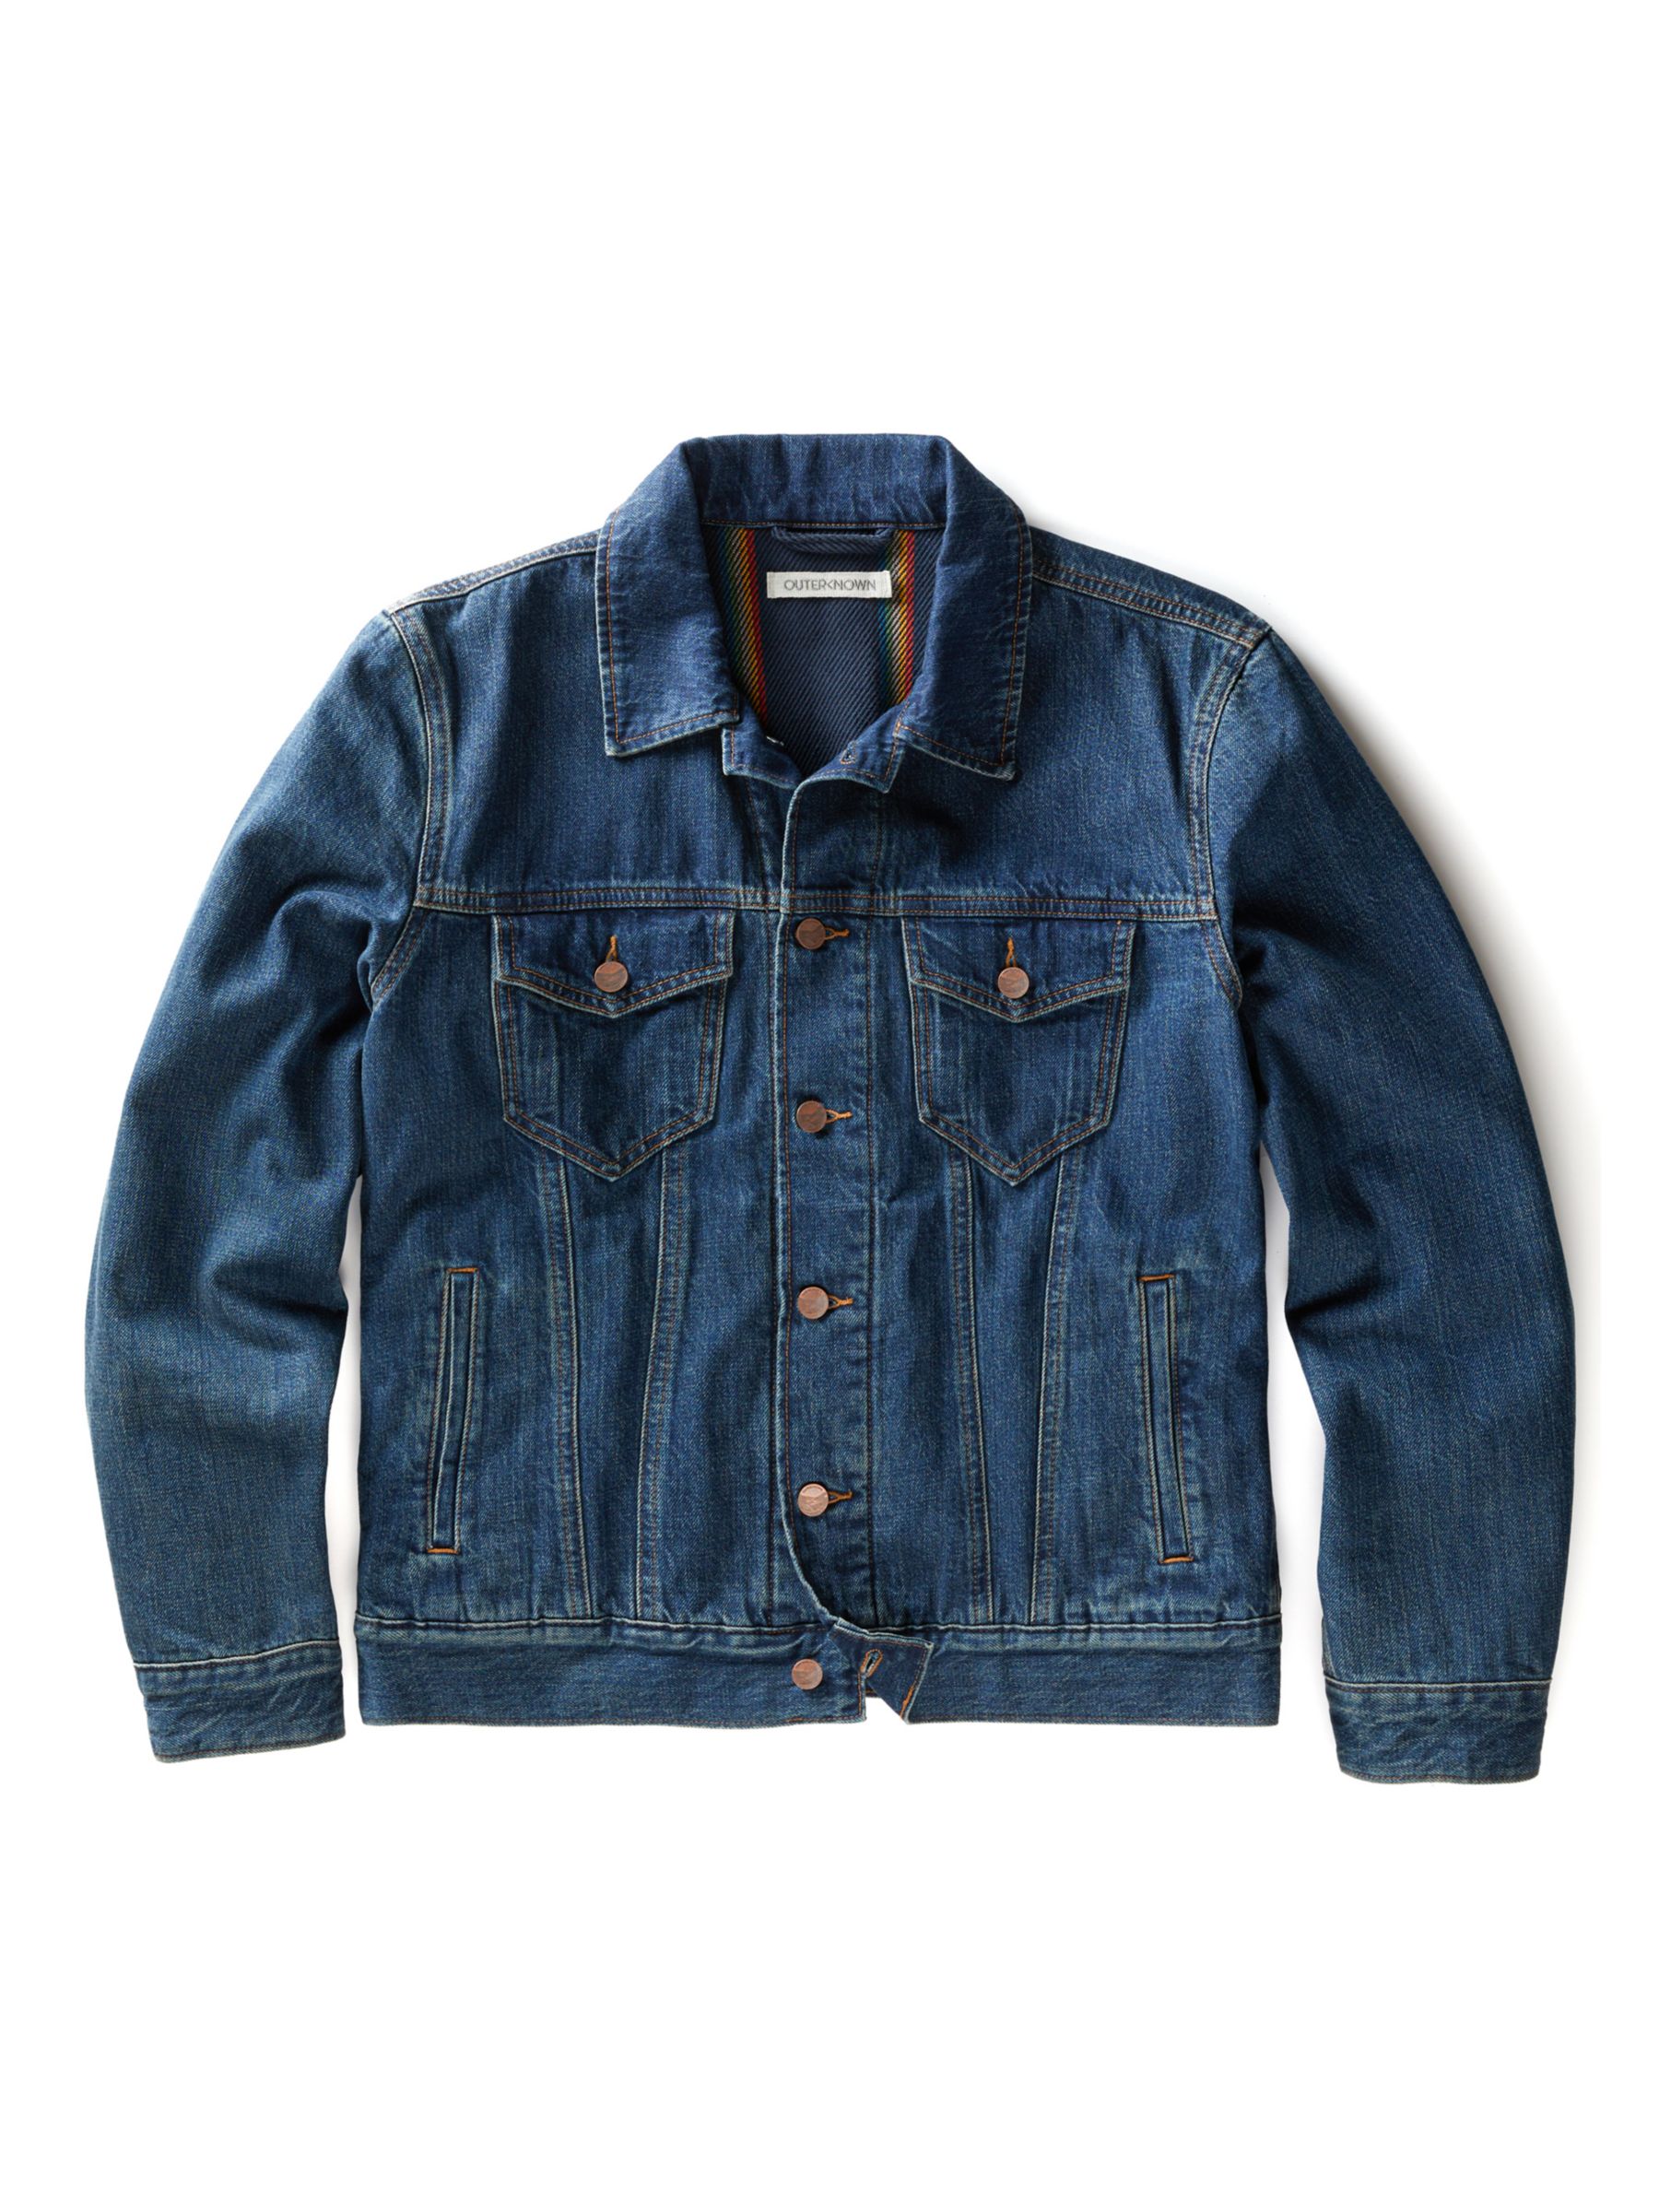 Outerknown Denim Lined Jacket, Tomales, S